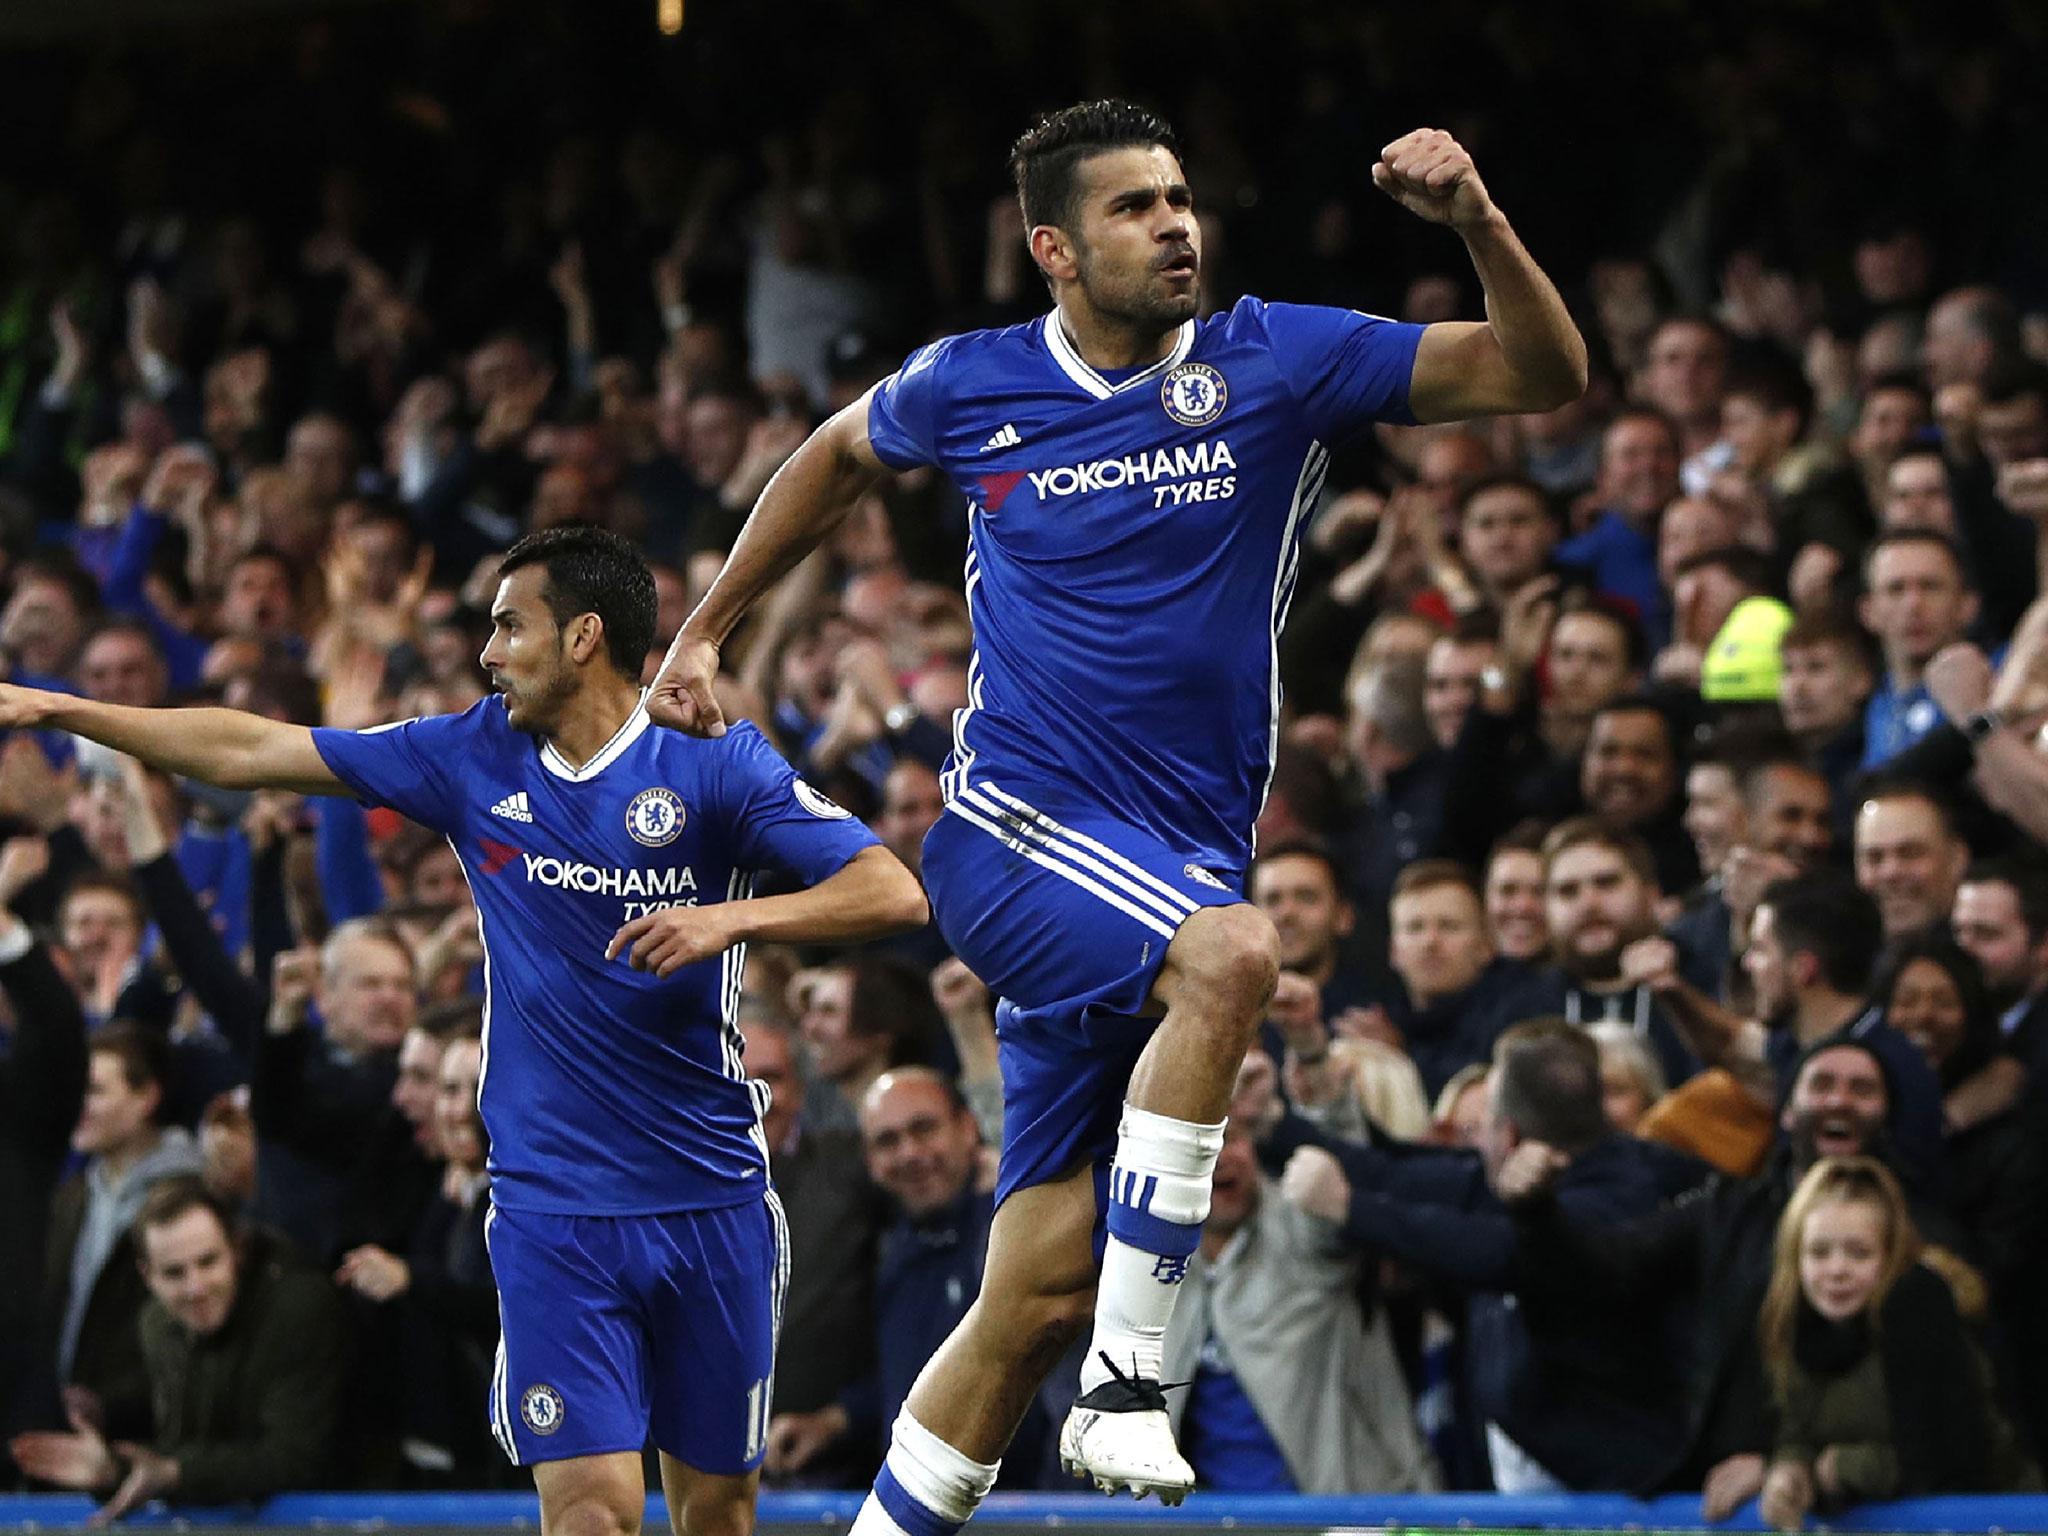 Diego Costa has not committed to a move to China as he weighs up his Chelsea future